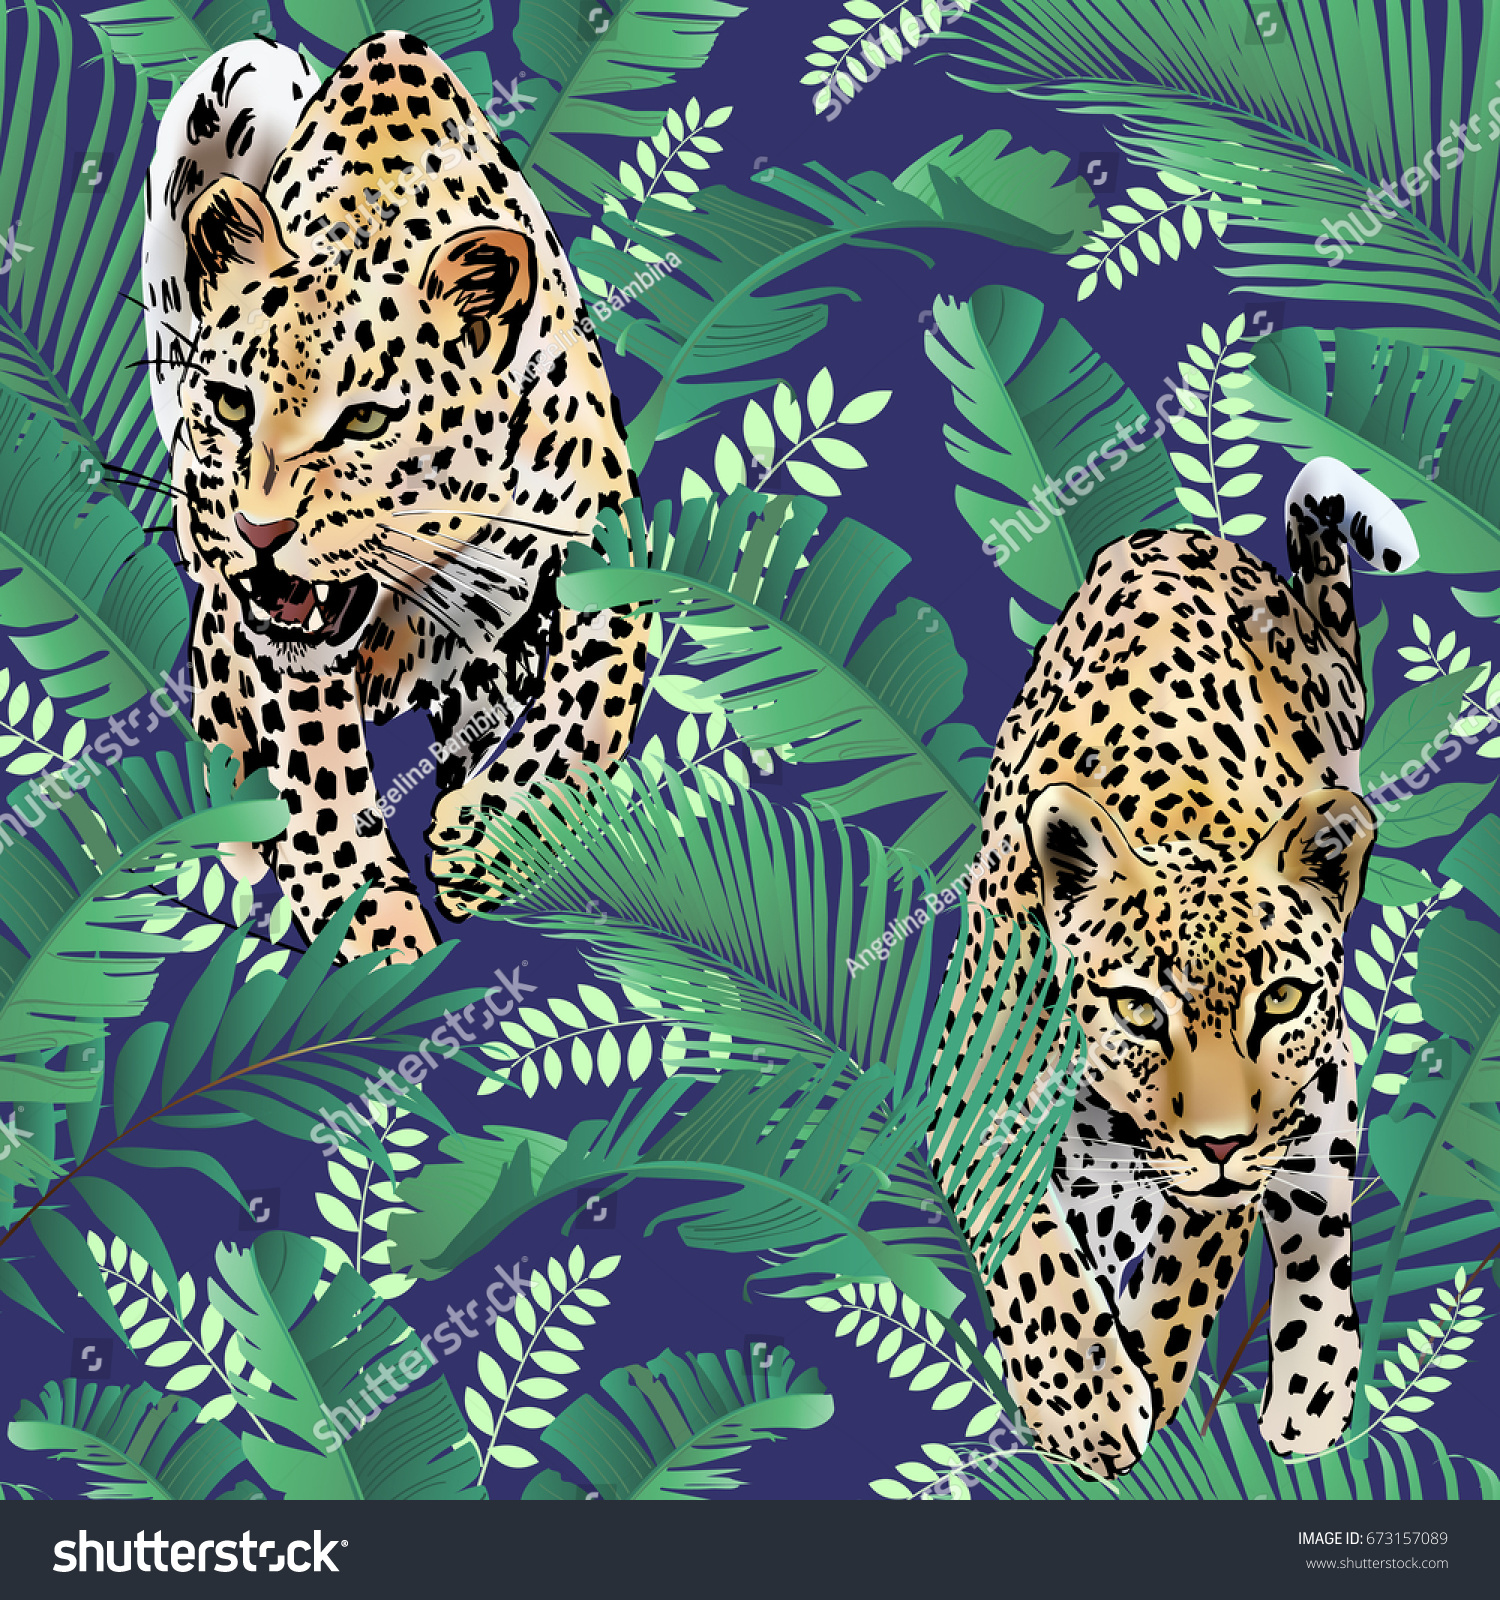 Cheetah Leopards Palm Leaves Tropical Watercolor Stock Vector (Royalty ...